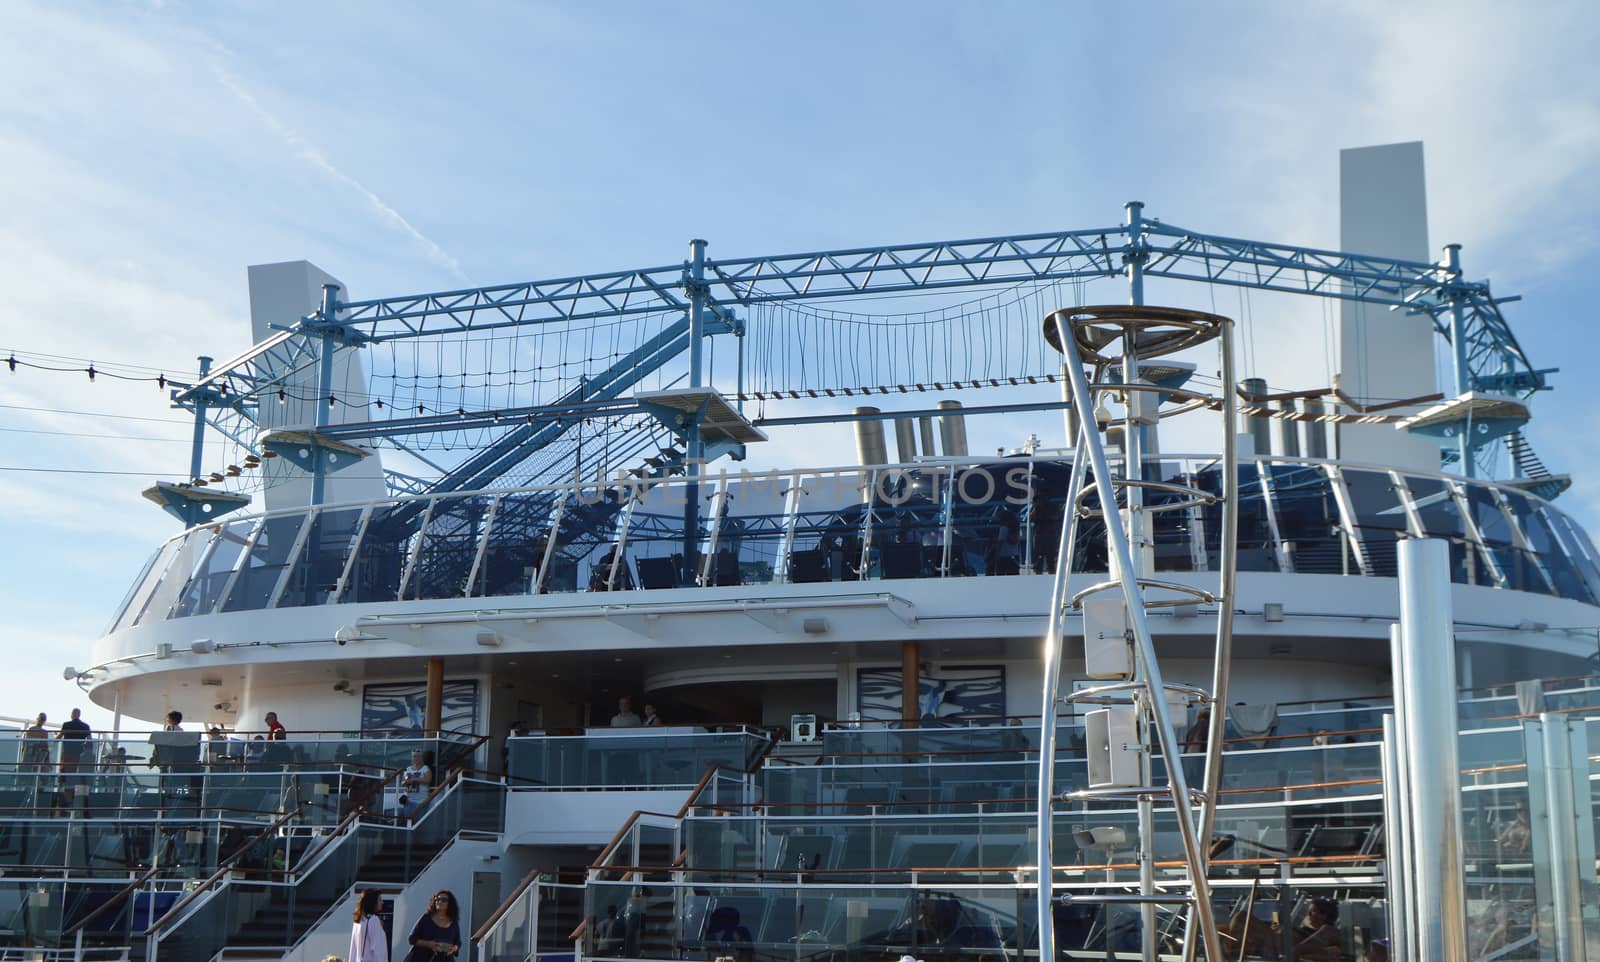 View of the upper deck of the cruise liner MSC Meraviglia, recreation area and amusement Park with rope ladders, October 7, 2018 by claire_lucia